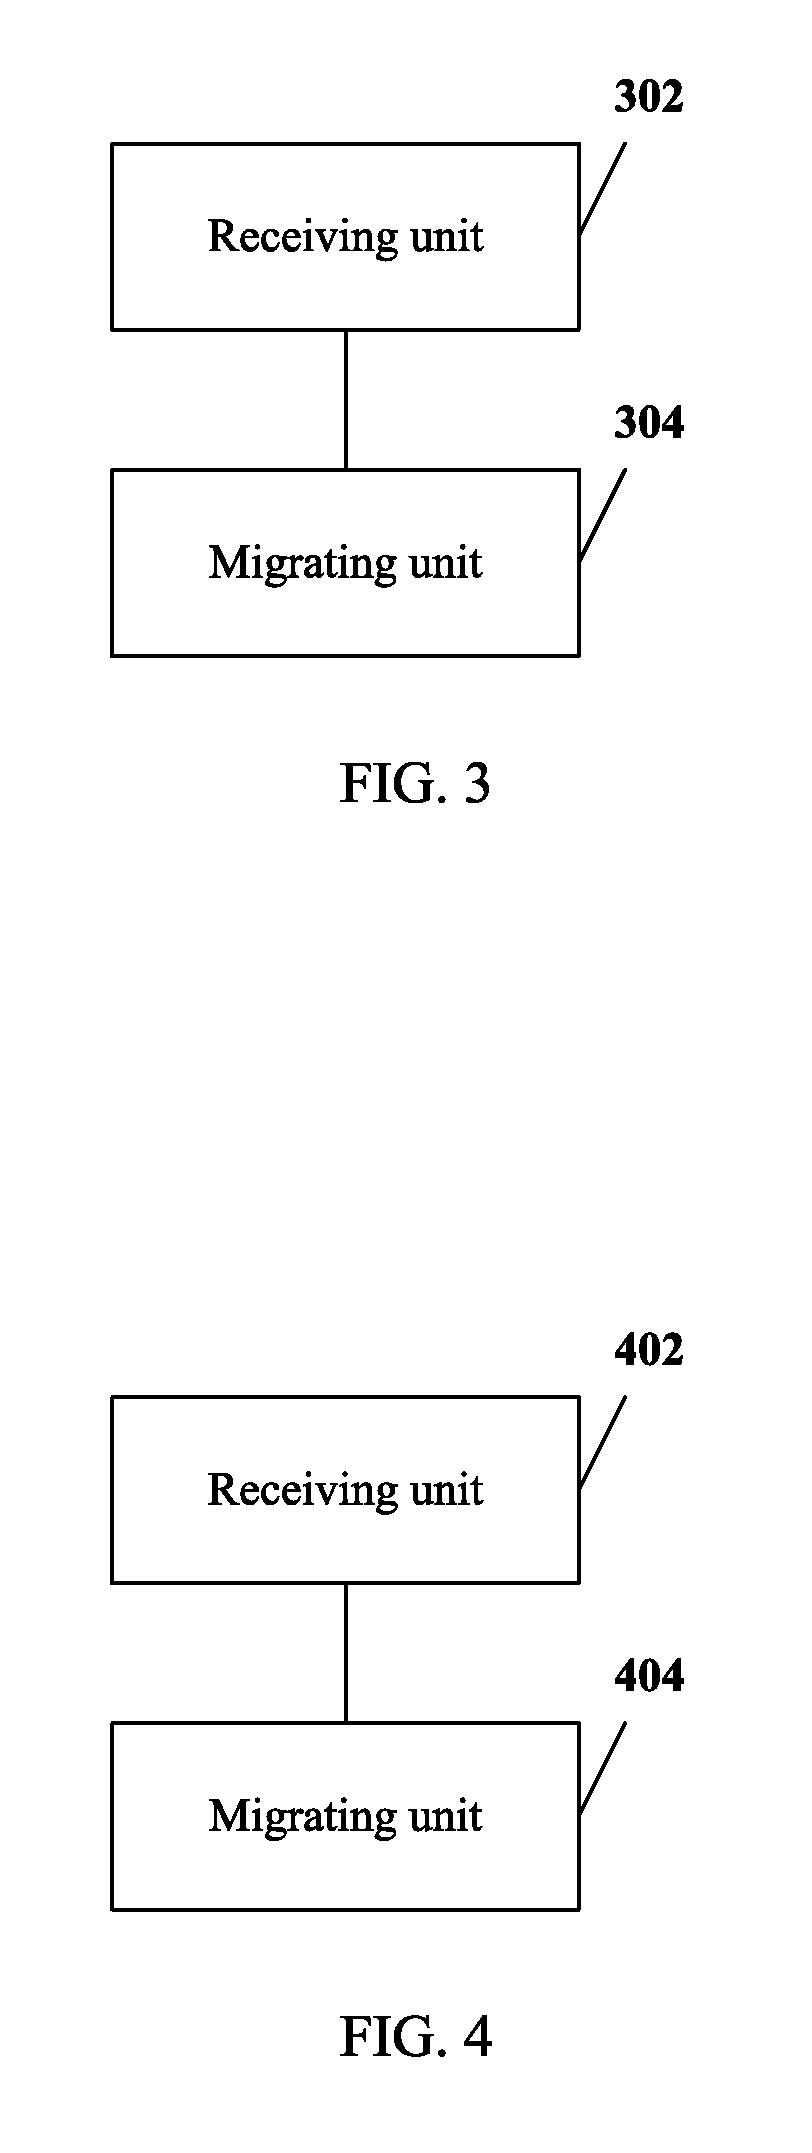 Method, migration management apparatus, network device, and virtual machine server for migrating virtual machine parameters